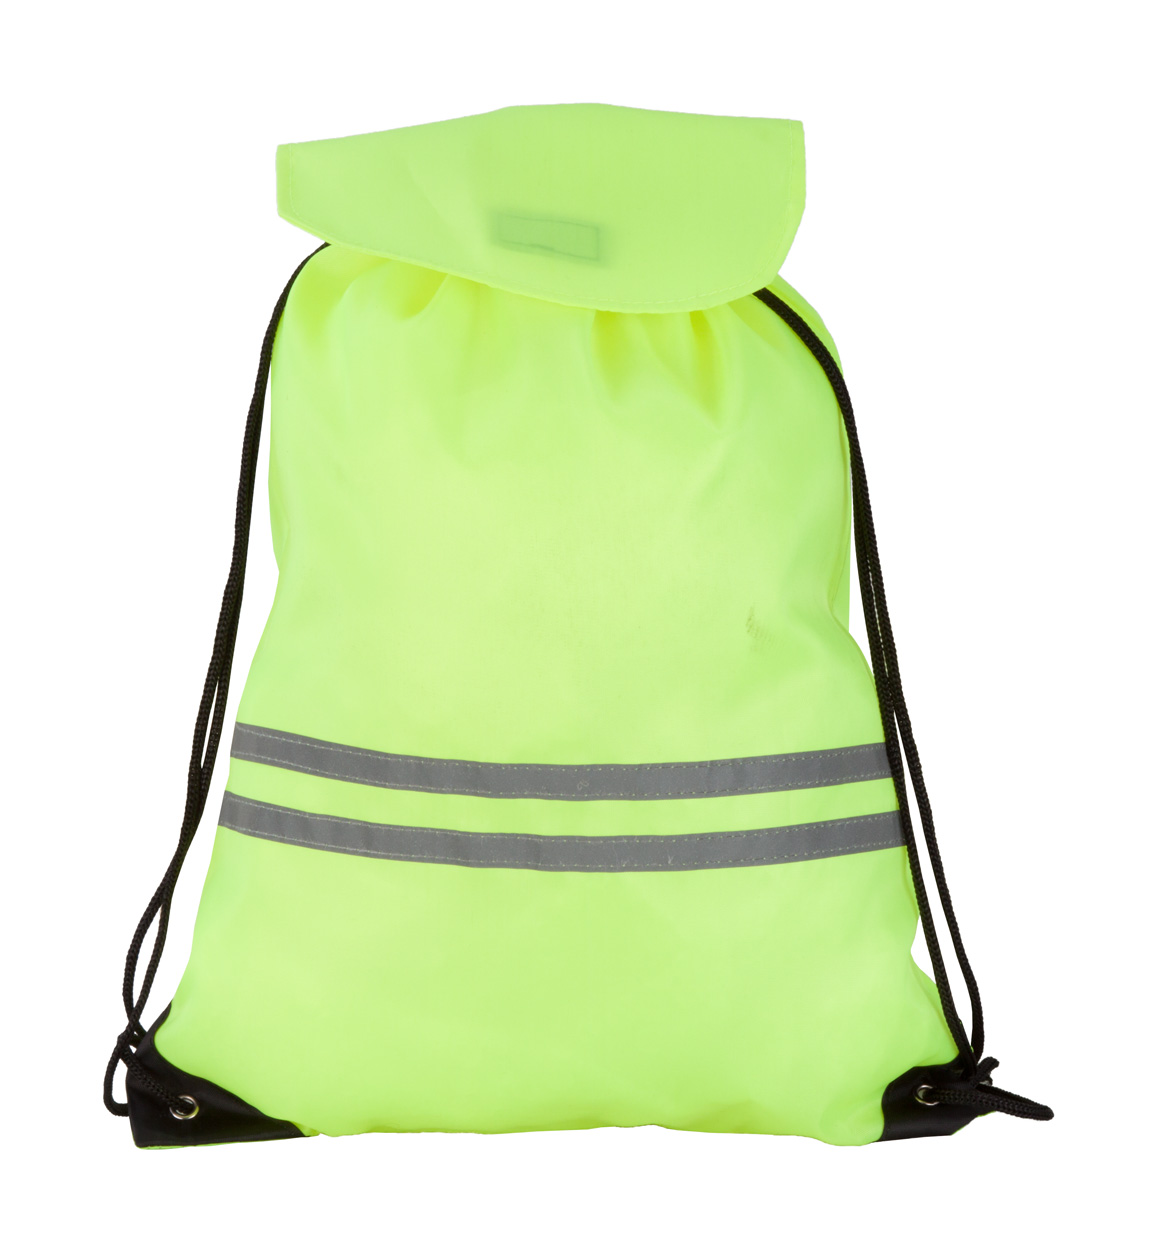 Drawstring backpack CARRYLIGHT with reflective stripes - safety yellow